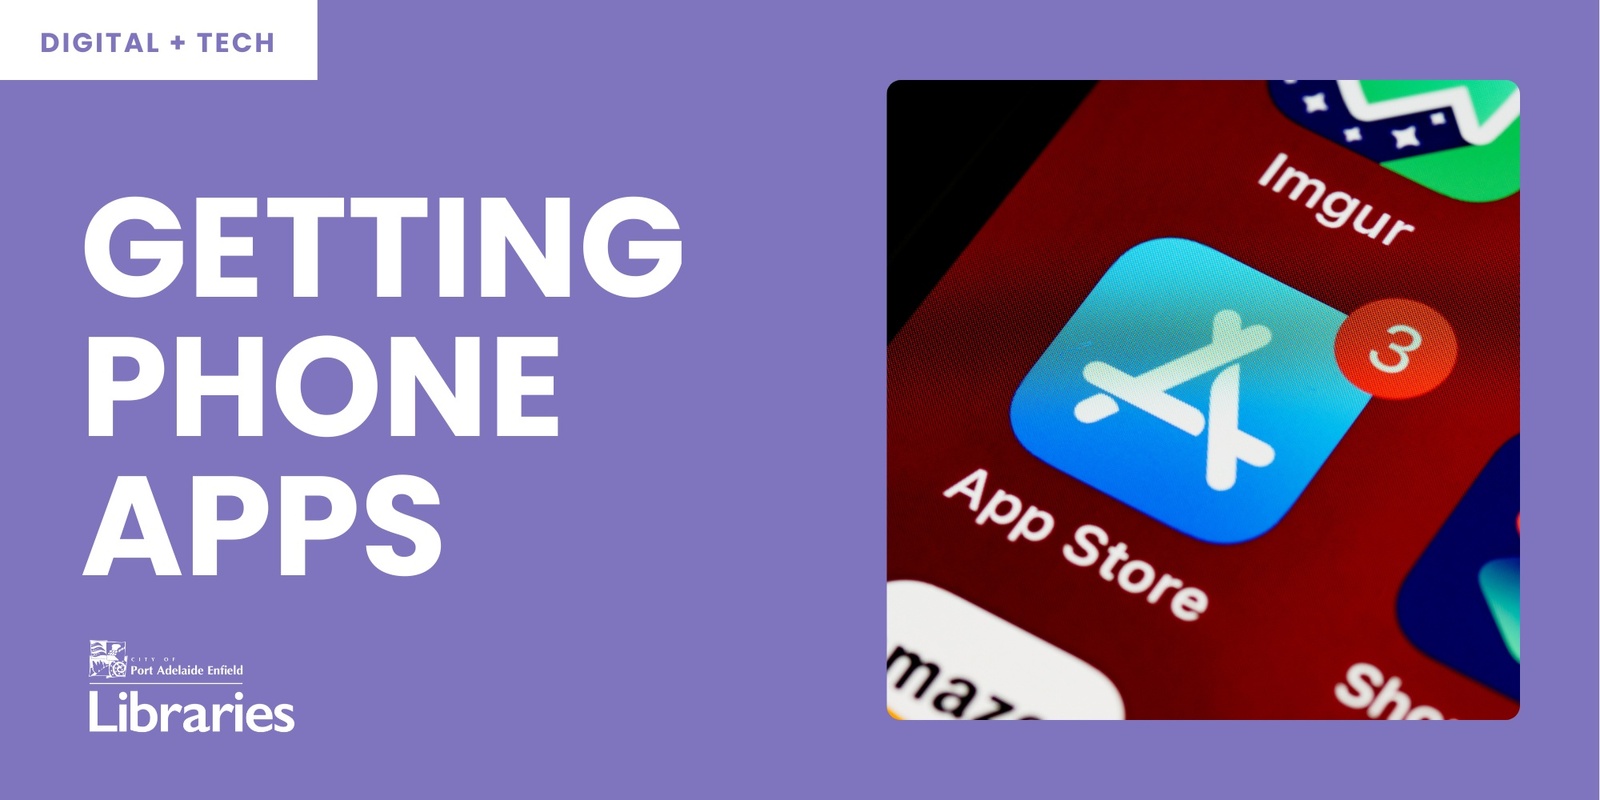 Banner image for Getting Phone Apps - Get Techy